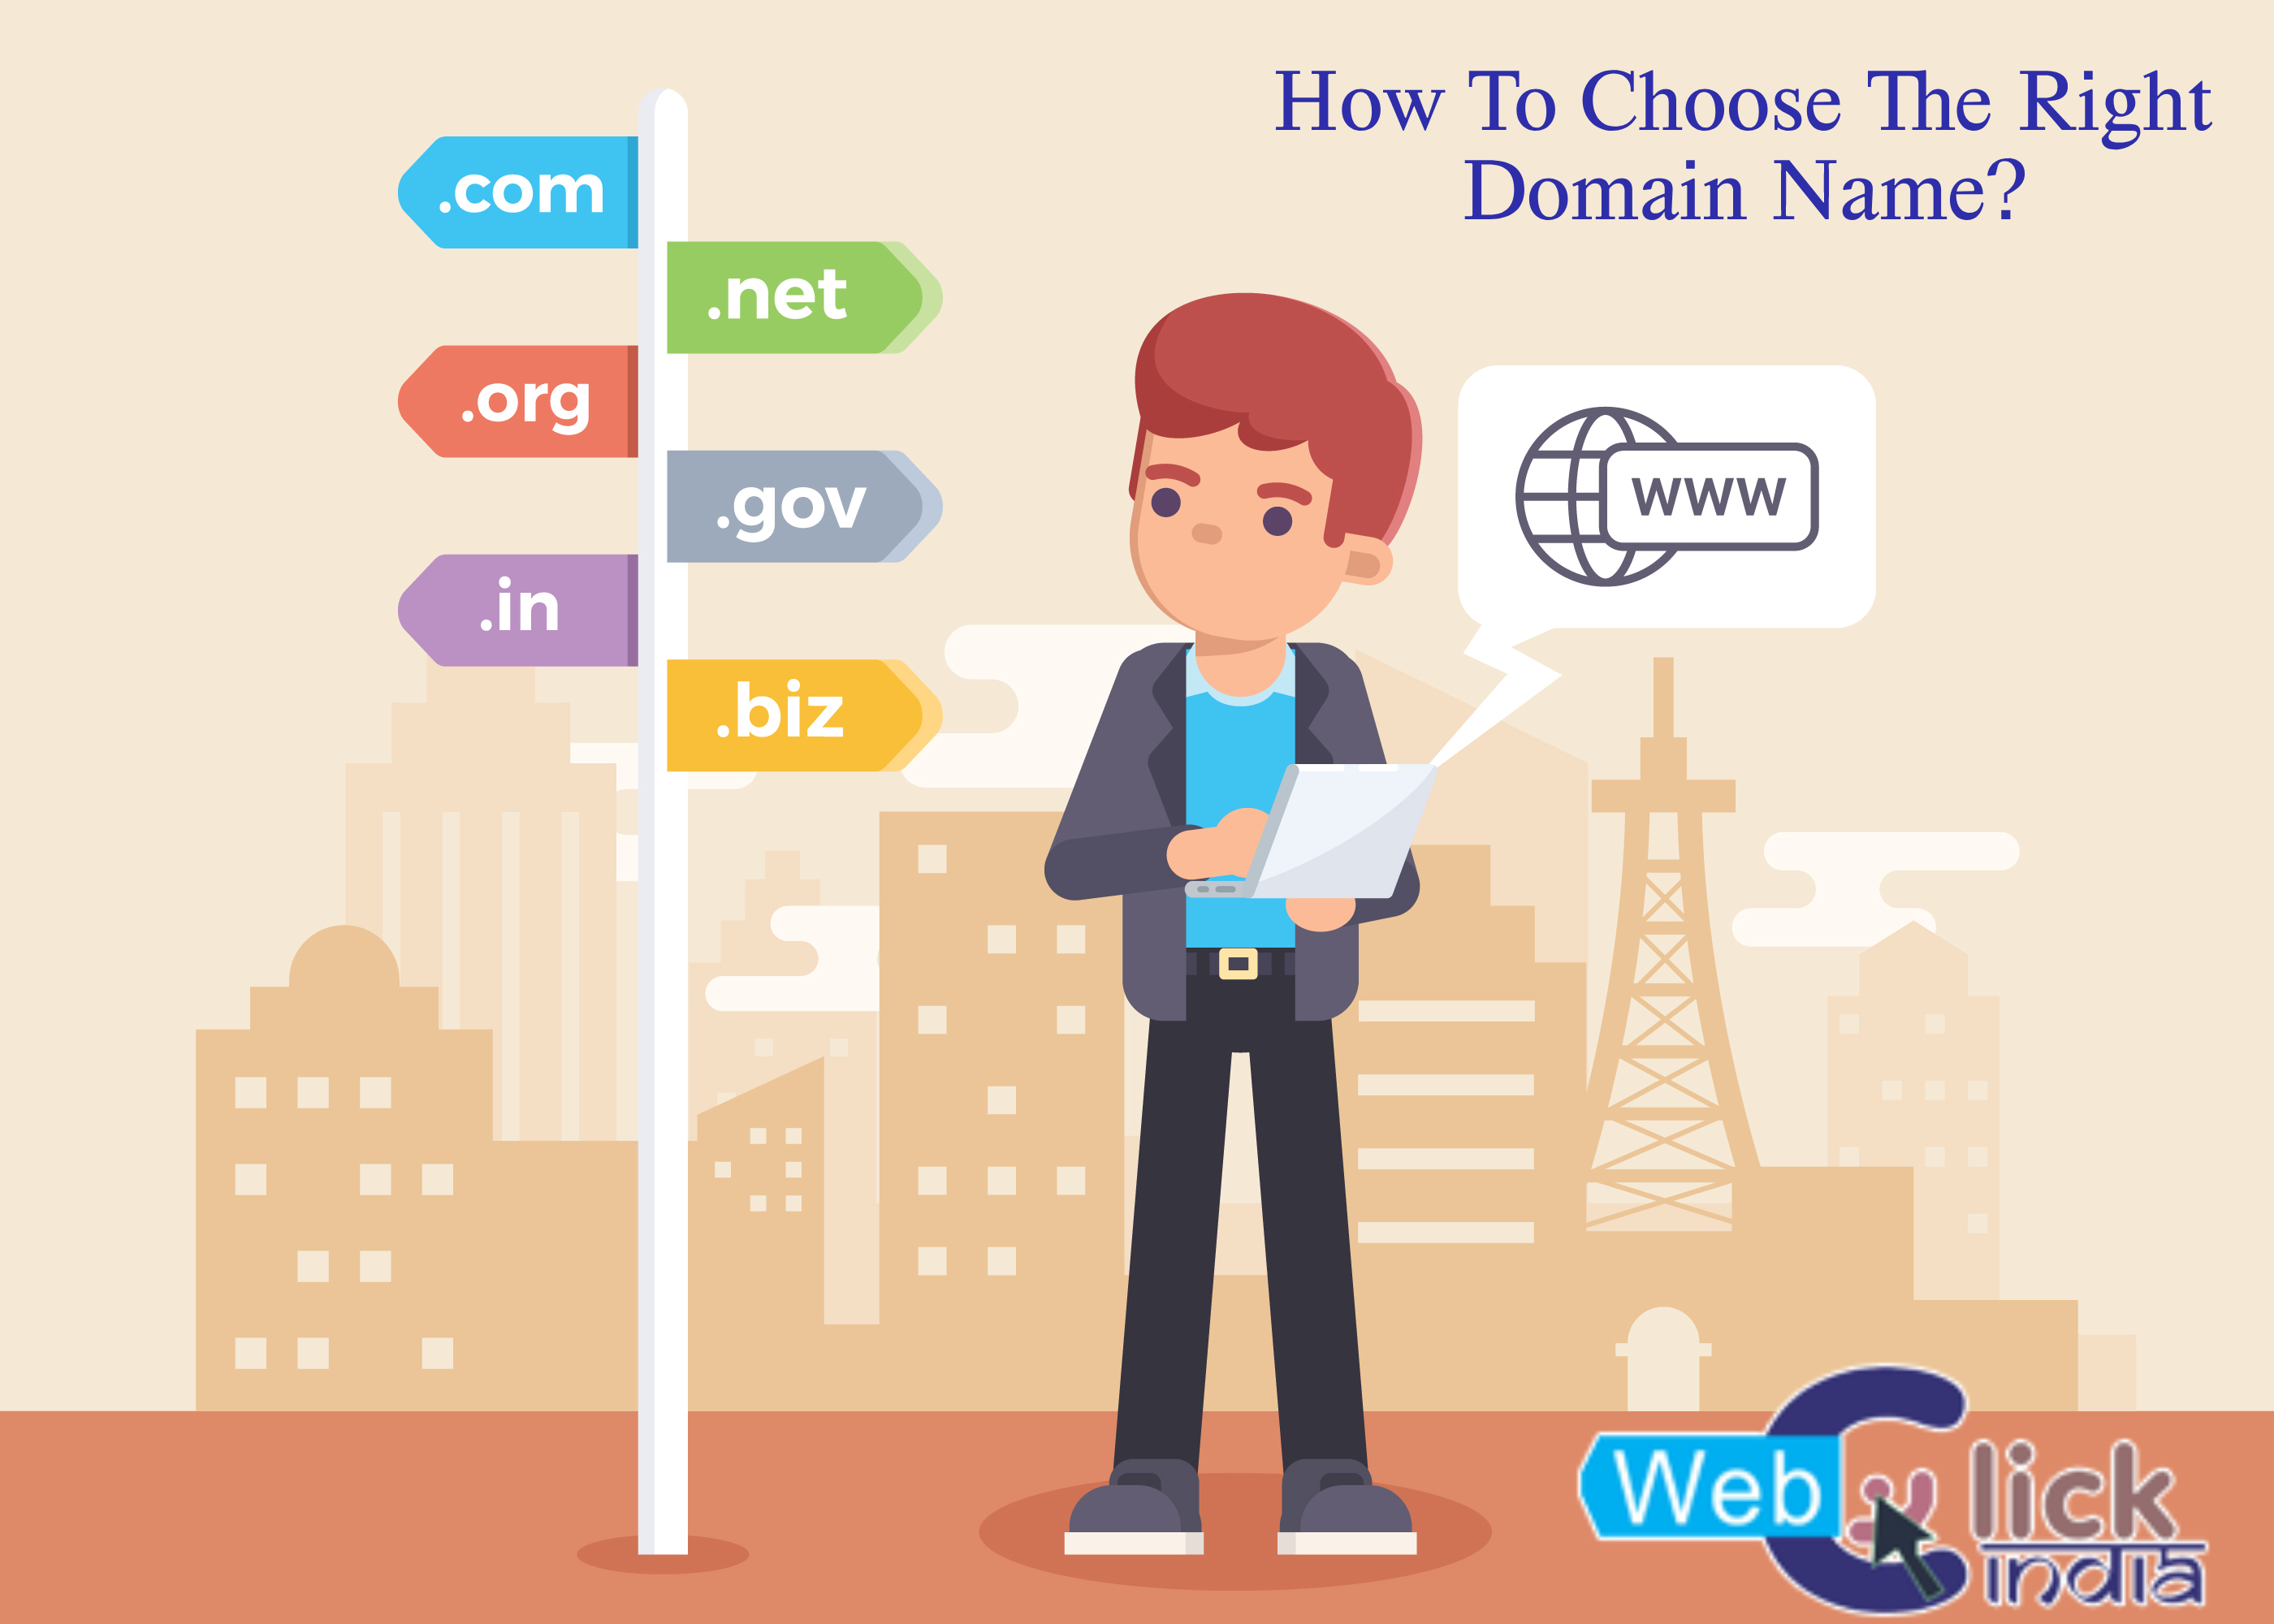 How To Choose The Right Domain Name?